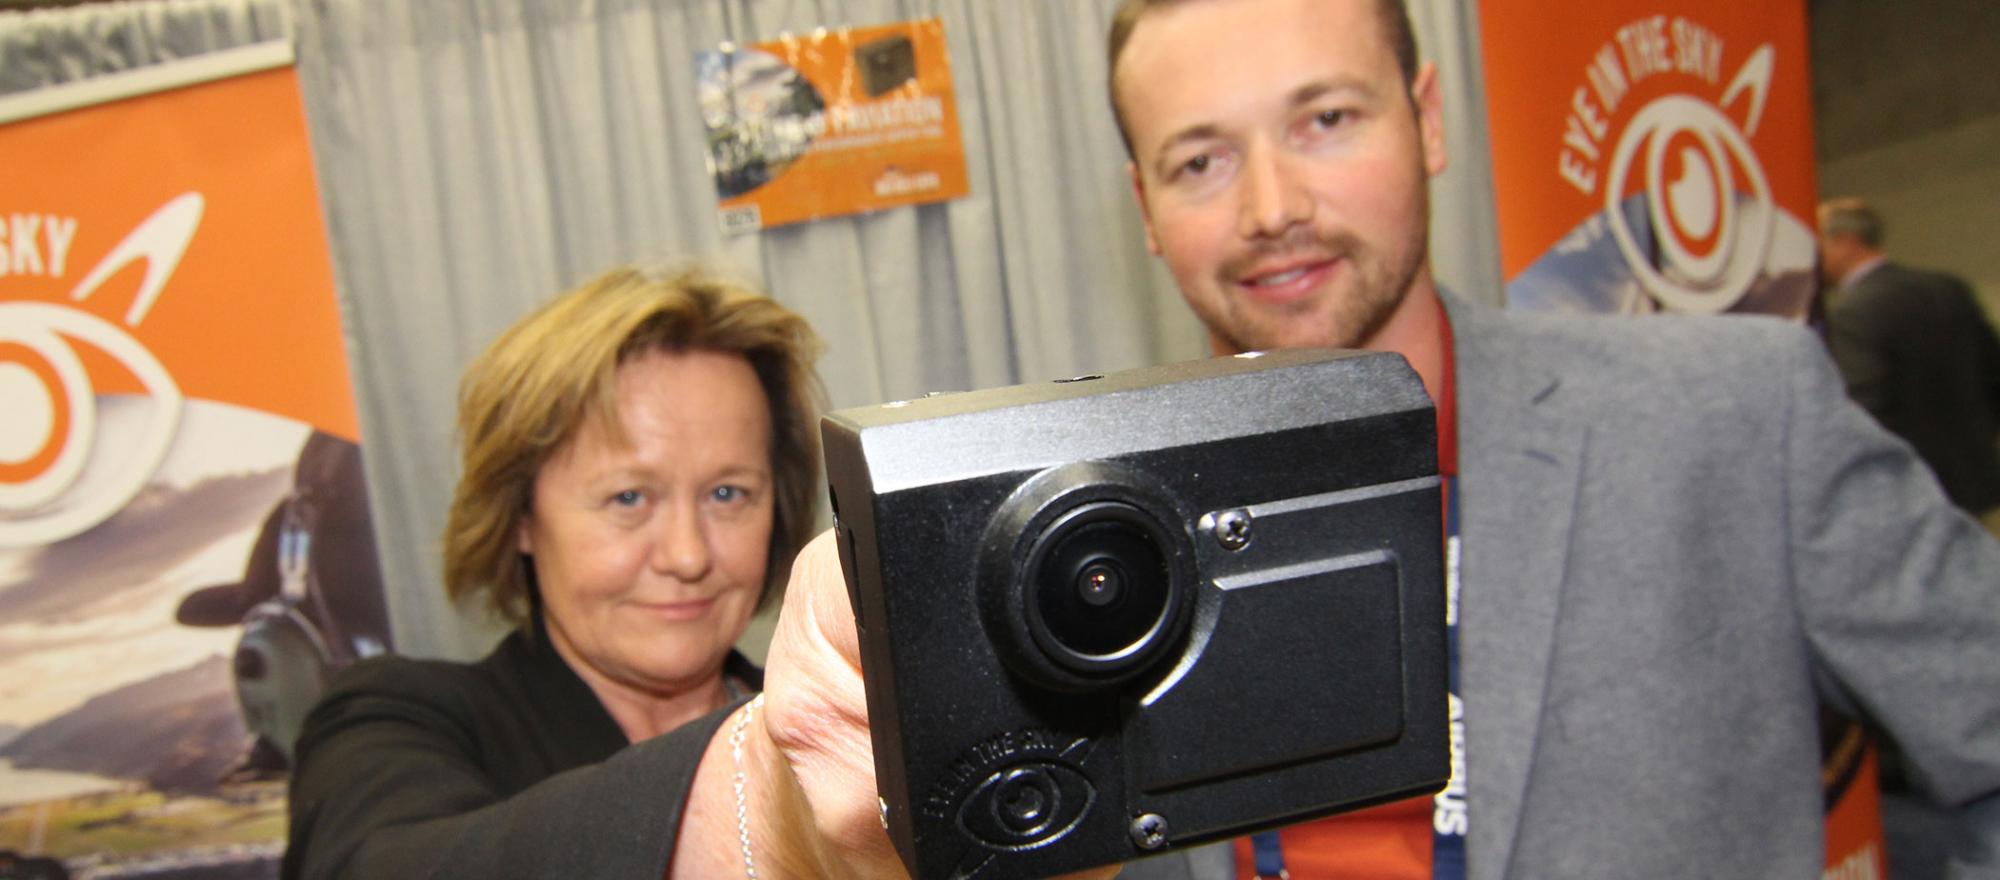 New Zealand air-tour CEO Louisa Patterson (left) has developed an in-cockpit video recorder and started Eye in the Sky to market the device. Photo: Mariano Rosales